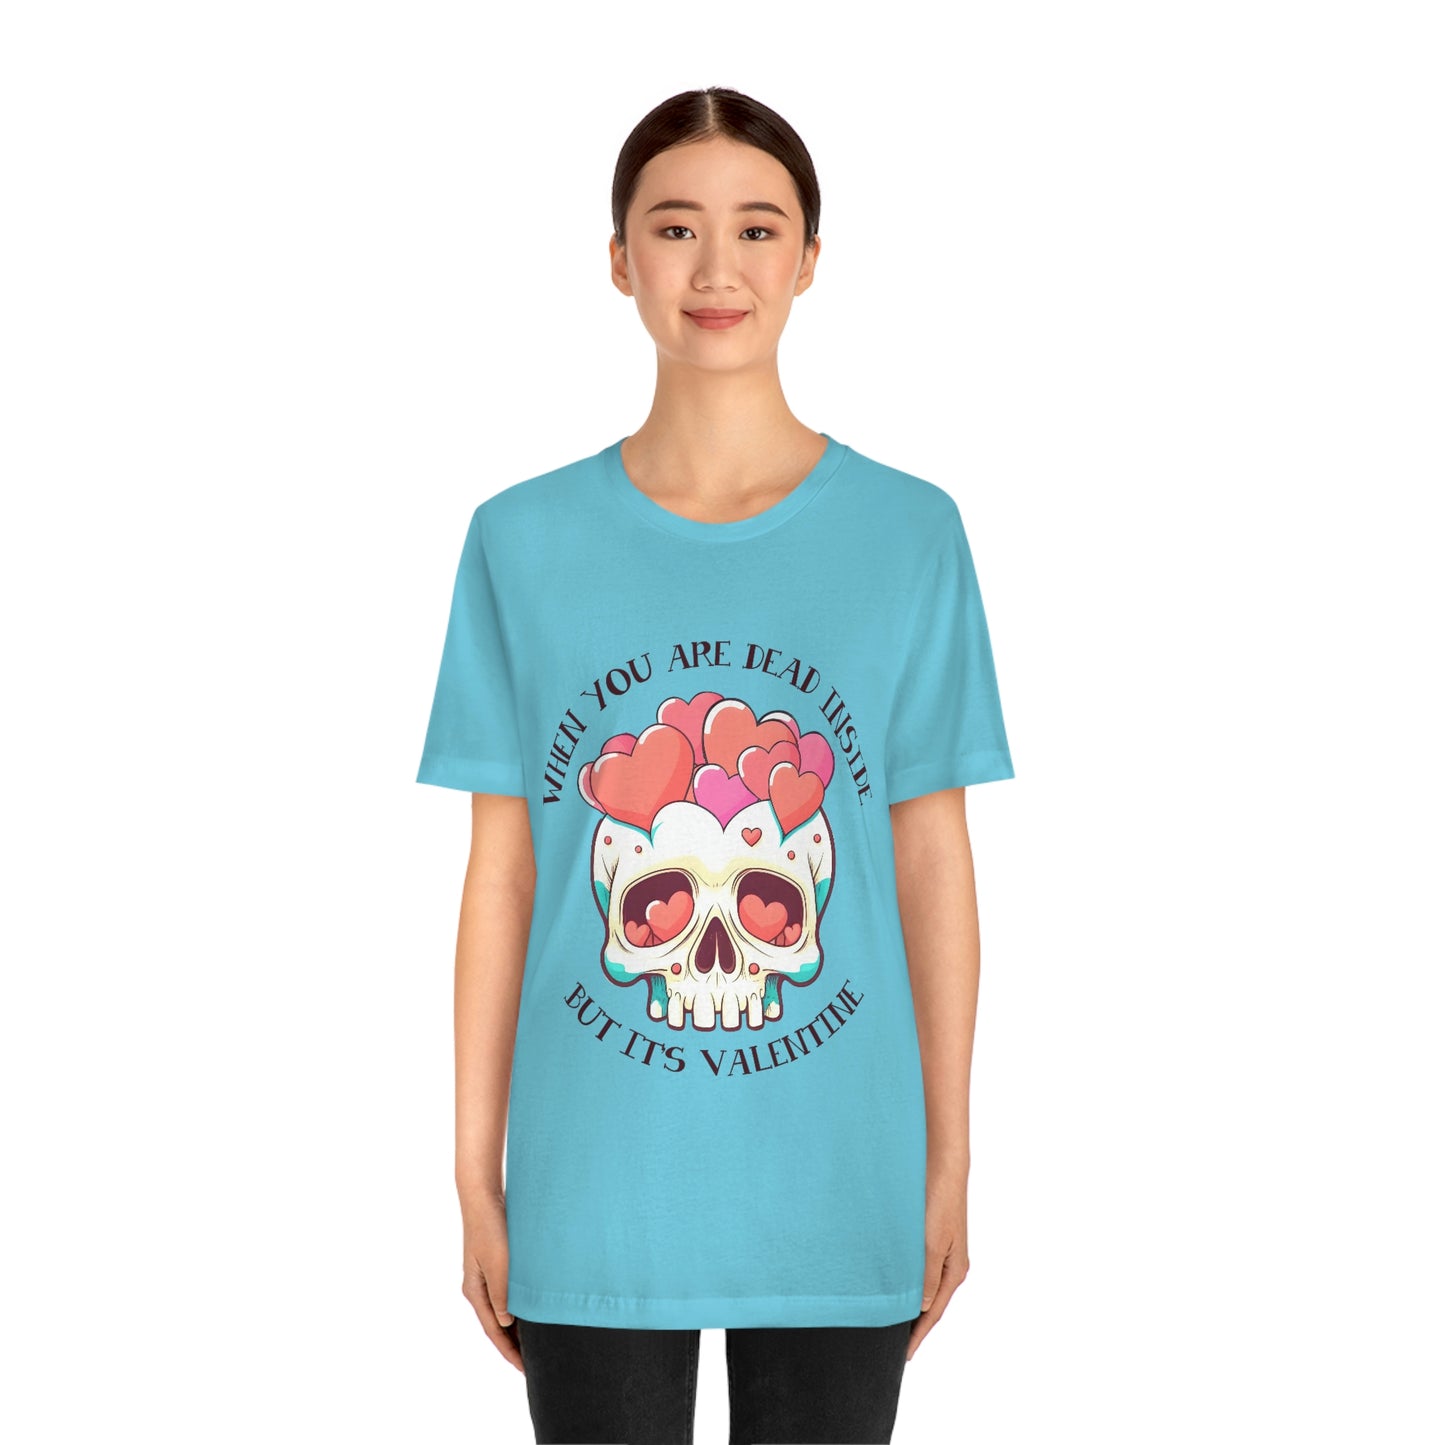 When Your Dead Inside, But It's Valentine's Skull & Pink Hearts Unisex Jersey Short Sleeve Tee